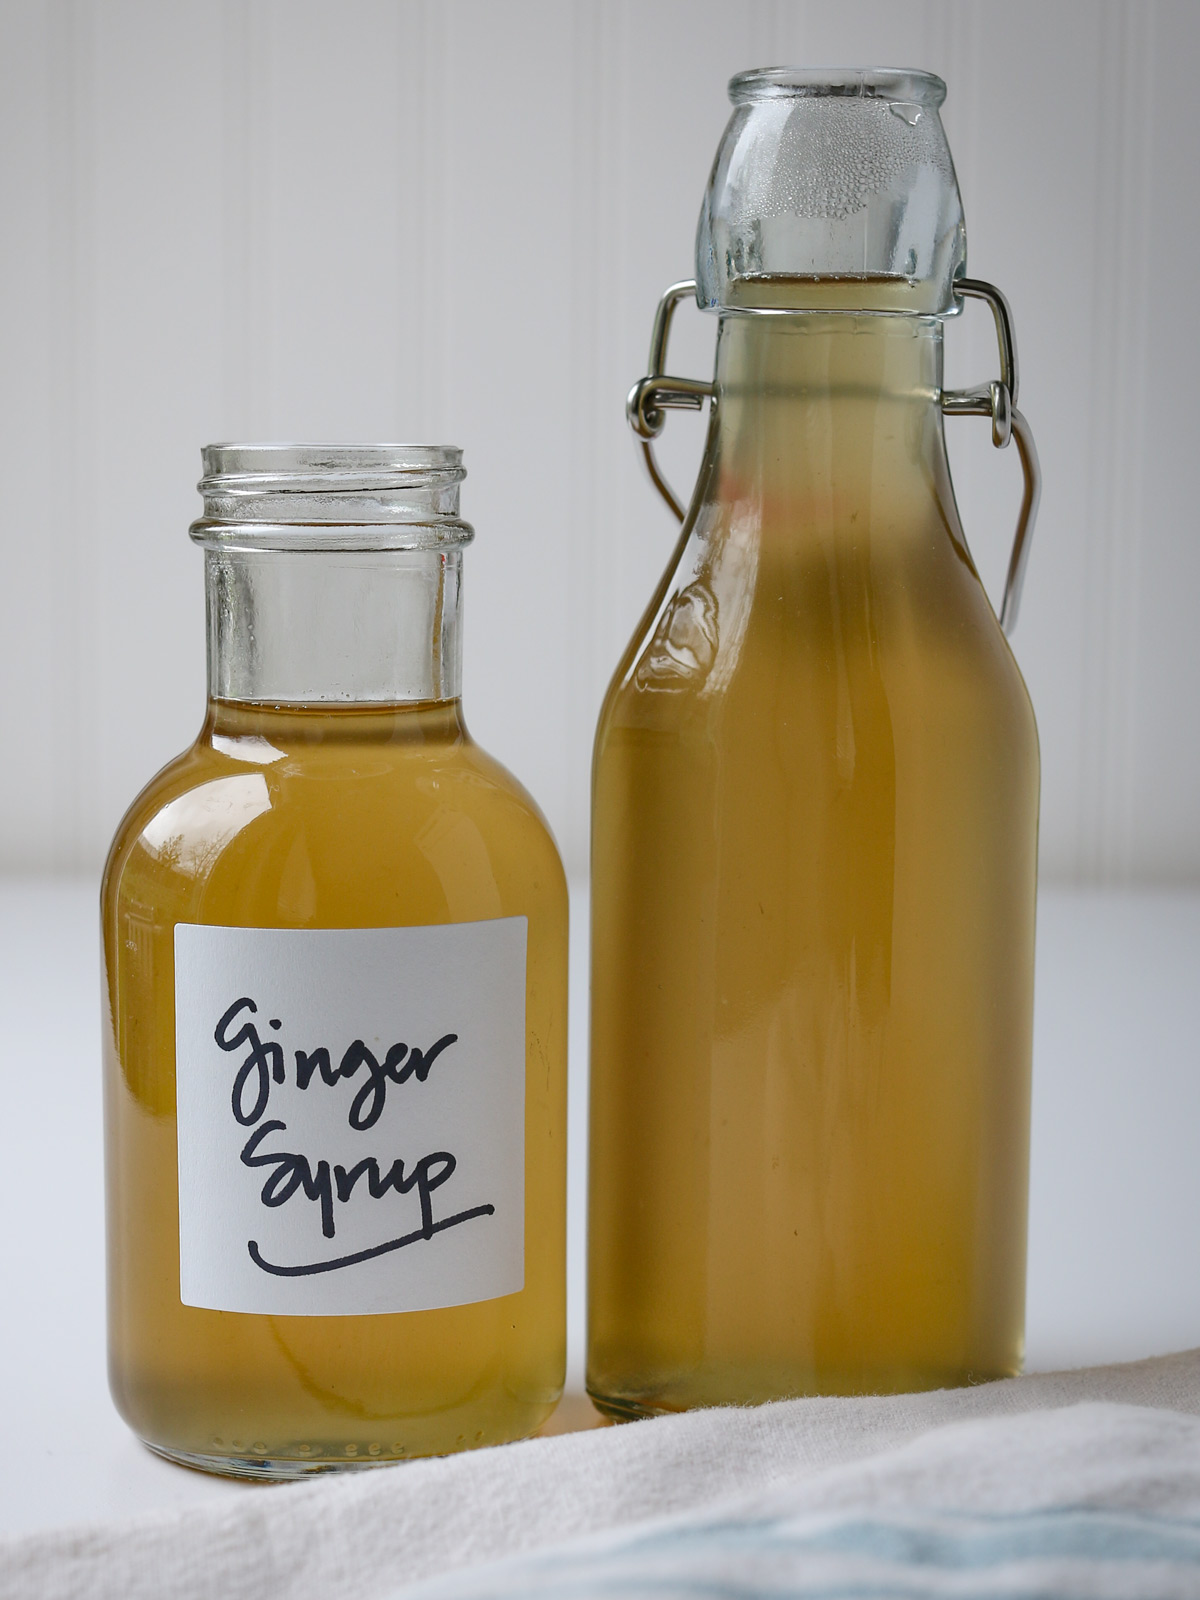 two bottles of ginger syrup on a table with a blue striped cloth.